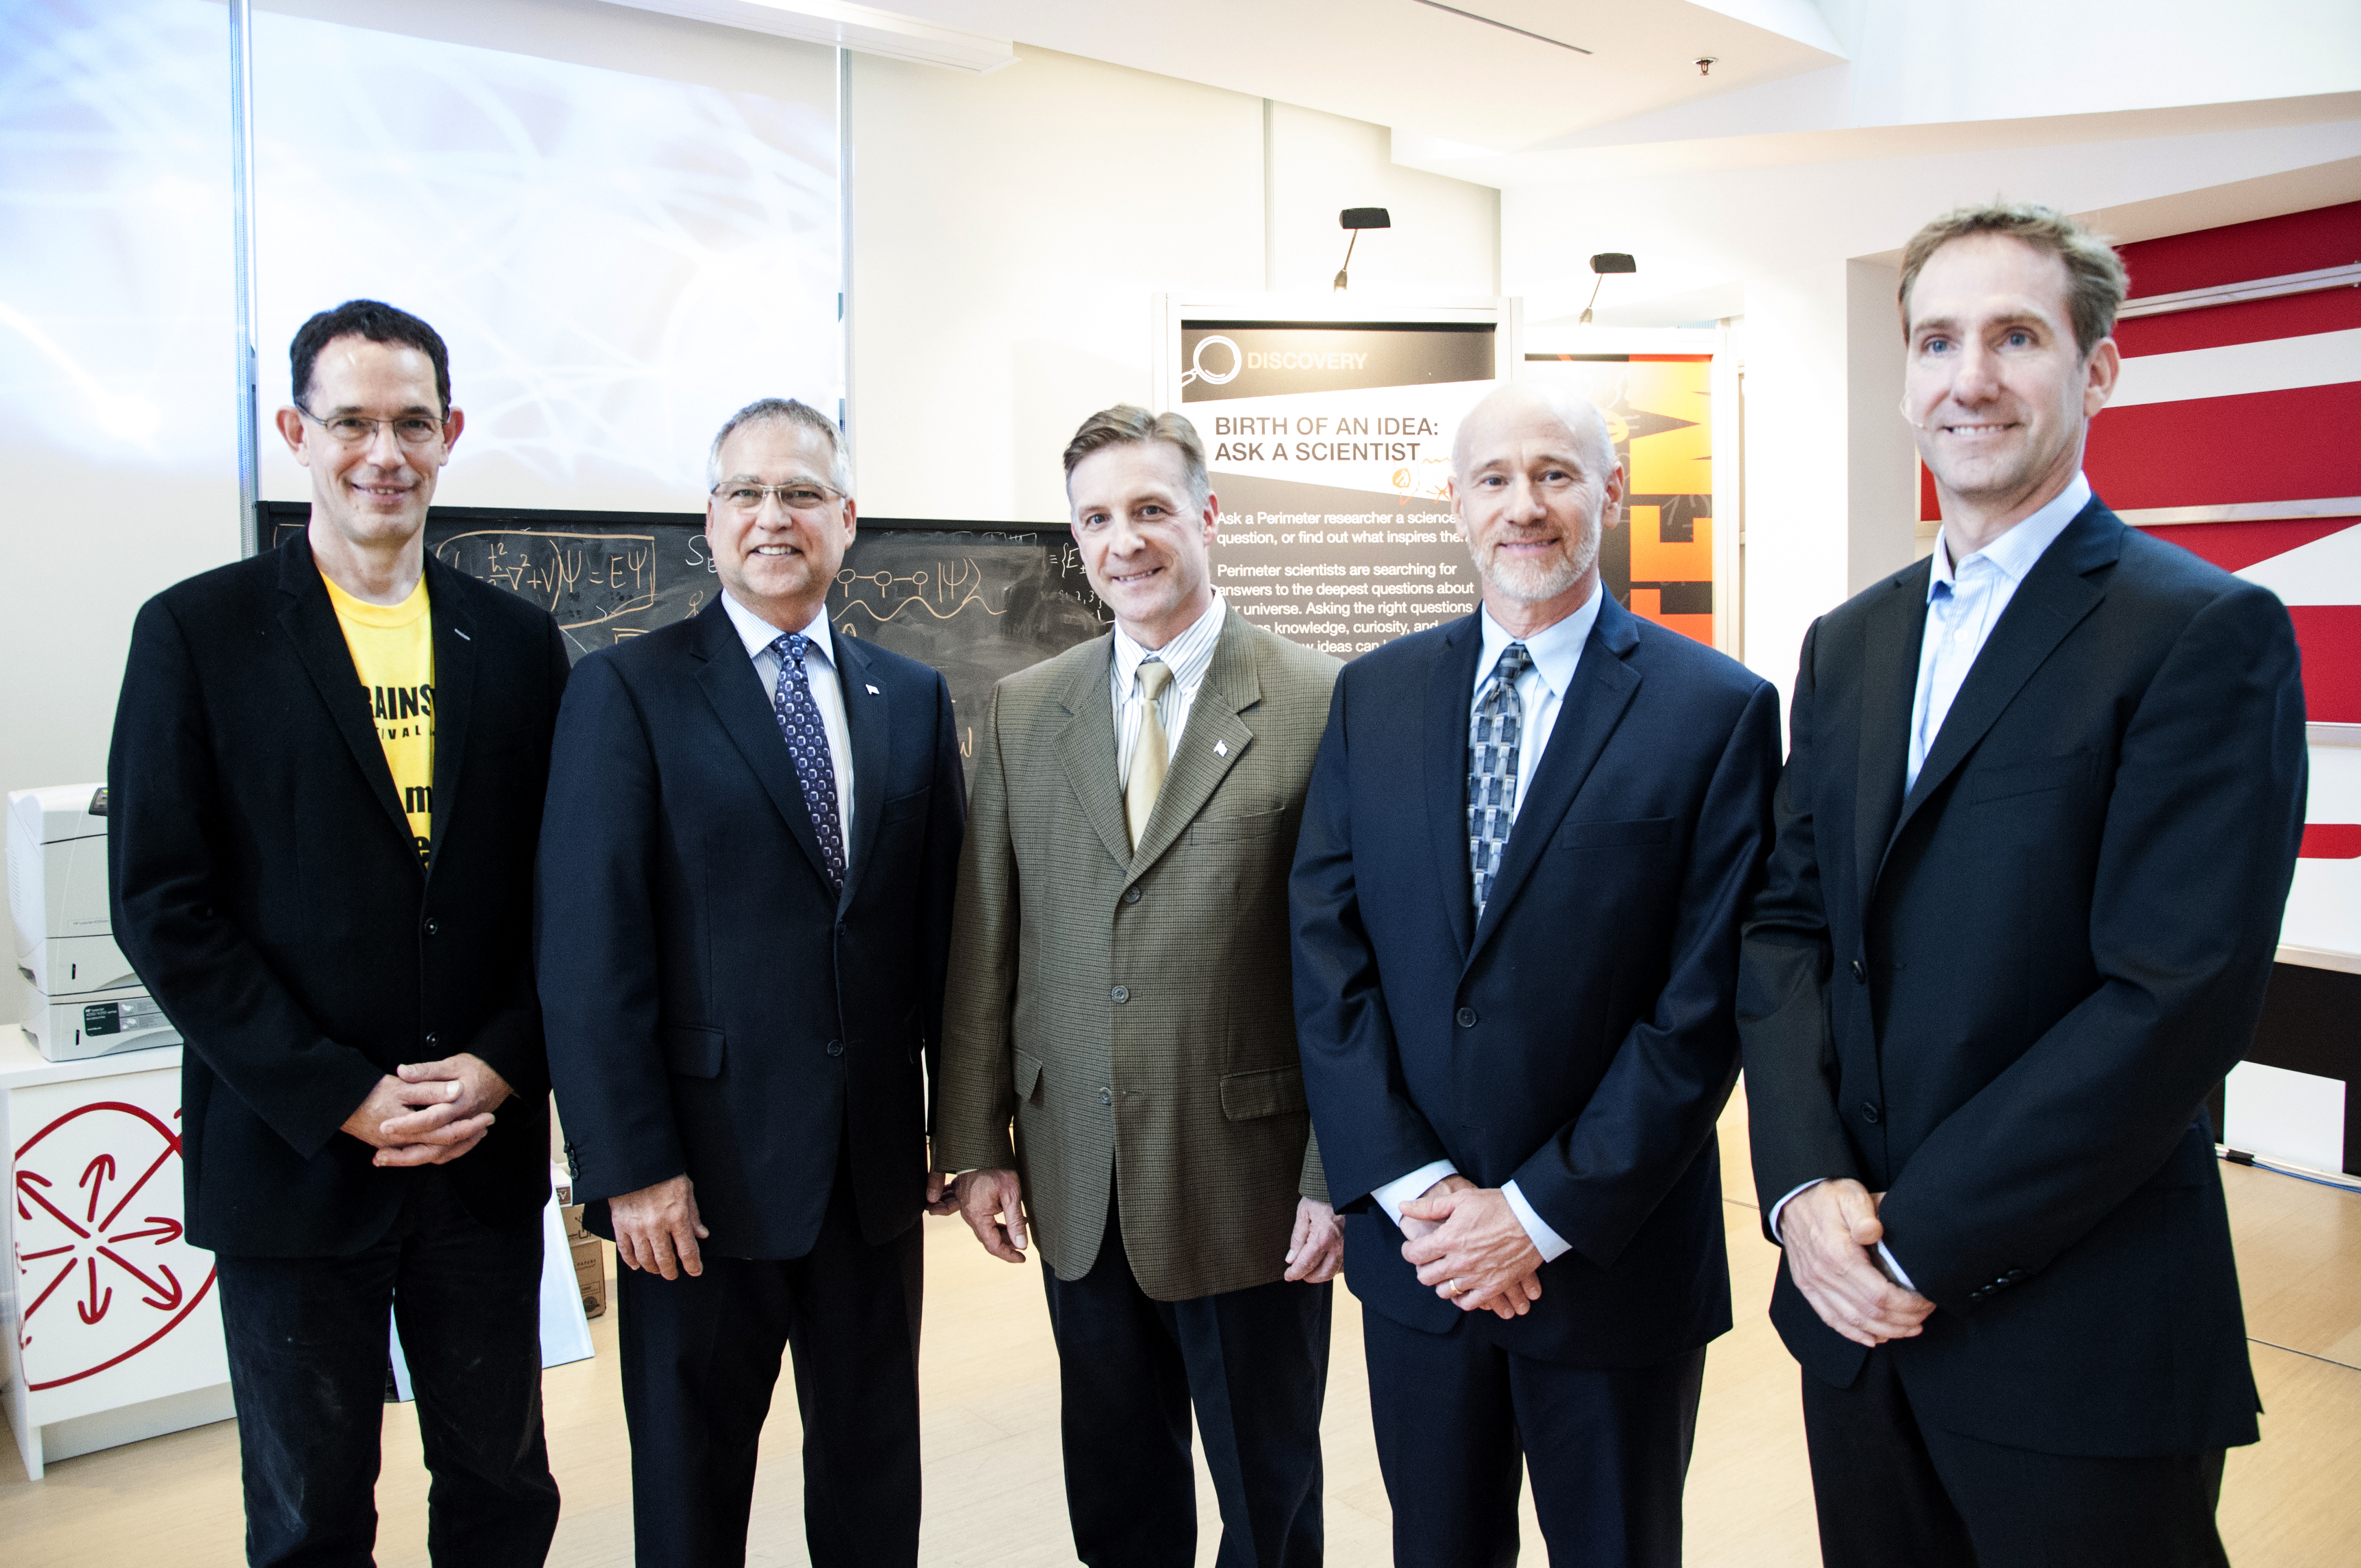 Group photo at the BrainSTEM resource launch with Perimeter Director Neil Turok, Gary Goodyear Minister of State for FedDev Ontario, Kitchener-Waterloo M.P. Peter Braid, Perimeter COO Michael Duschenes, and Greg Dick Perimeter Director of Educational Outreach.